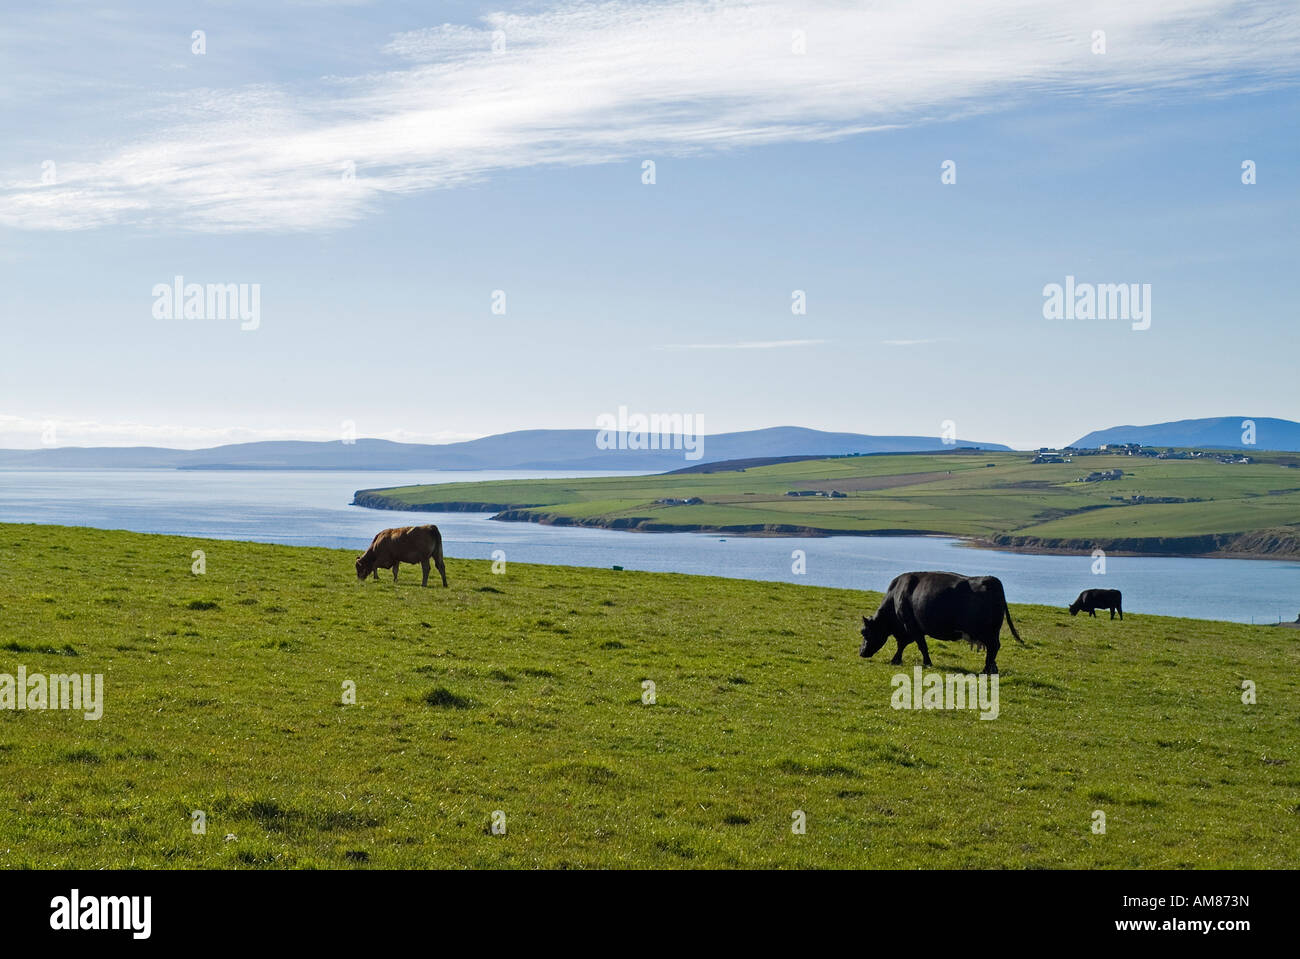 dh Scottish Cows CATTLE UK Herde in Hanglage Beweidung über Scapa Flow Fields uk Farming Weide Black angus Beef Cow Farmland Stockfoto